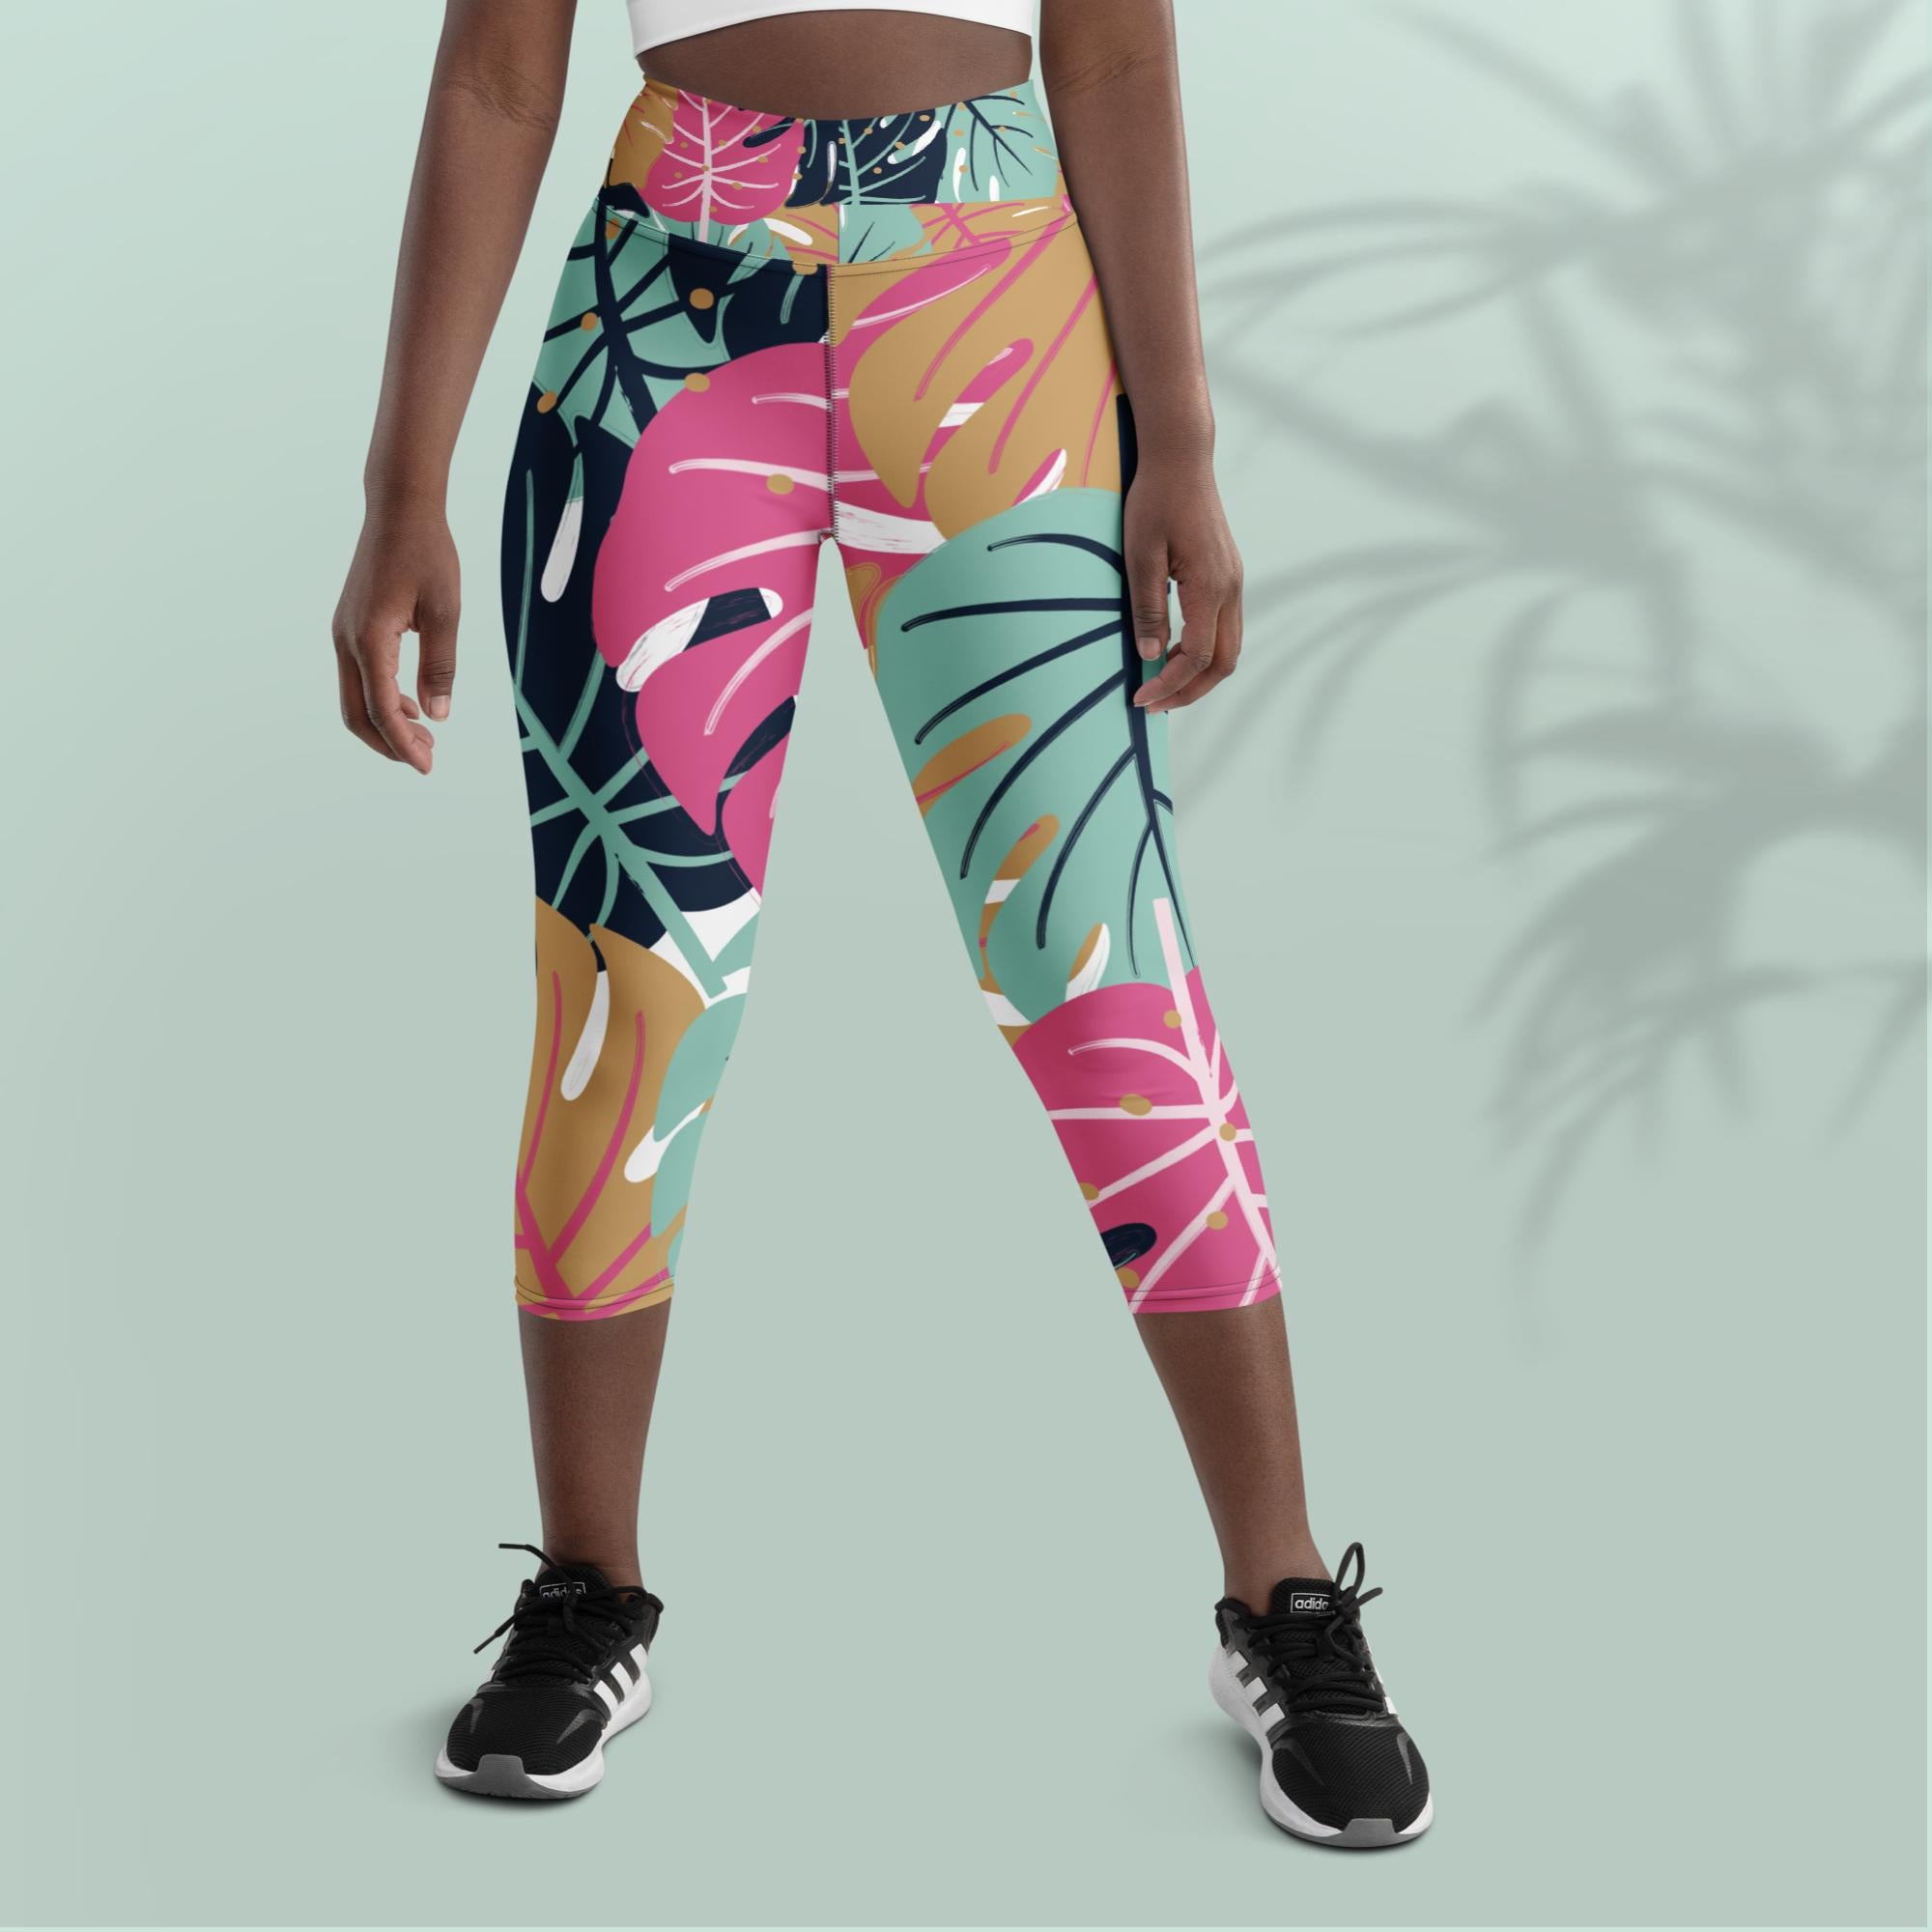 Vibrant Capri Leggings - Revive Wear     These Vibrant Yoga Capri Leggings with a high, elastic waistband are perfect for yoga, the gym, or simply a comfortable day at home. Complete your outfit with our Vibrant Longline Sports Bra. 